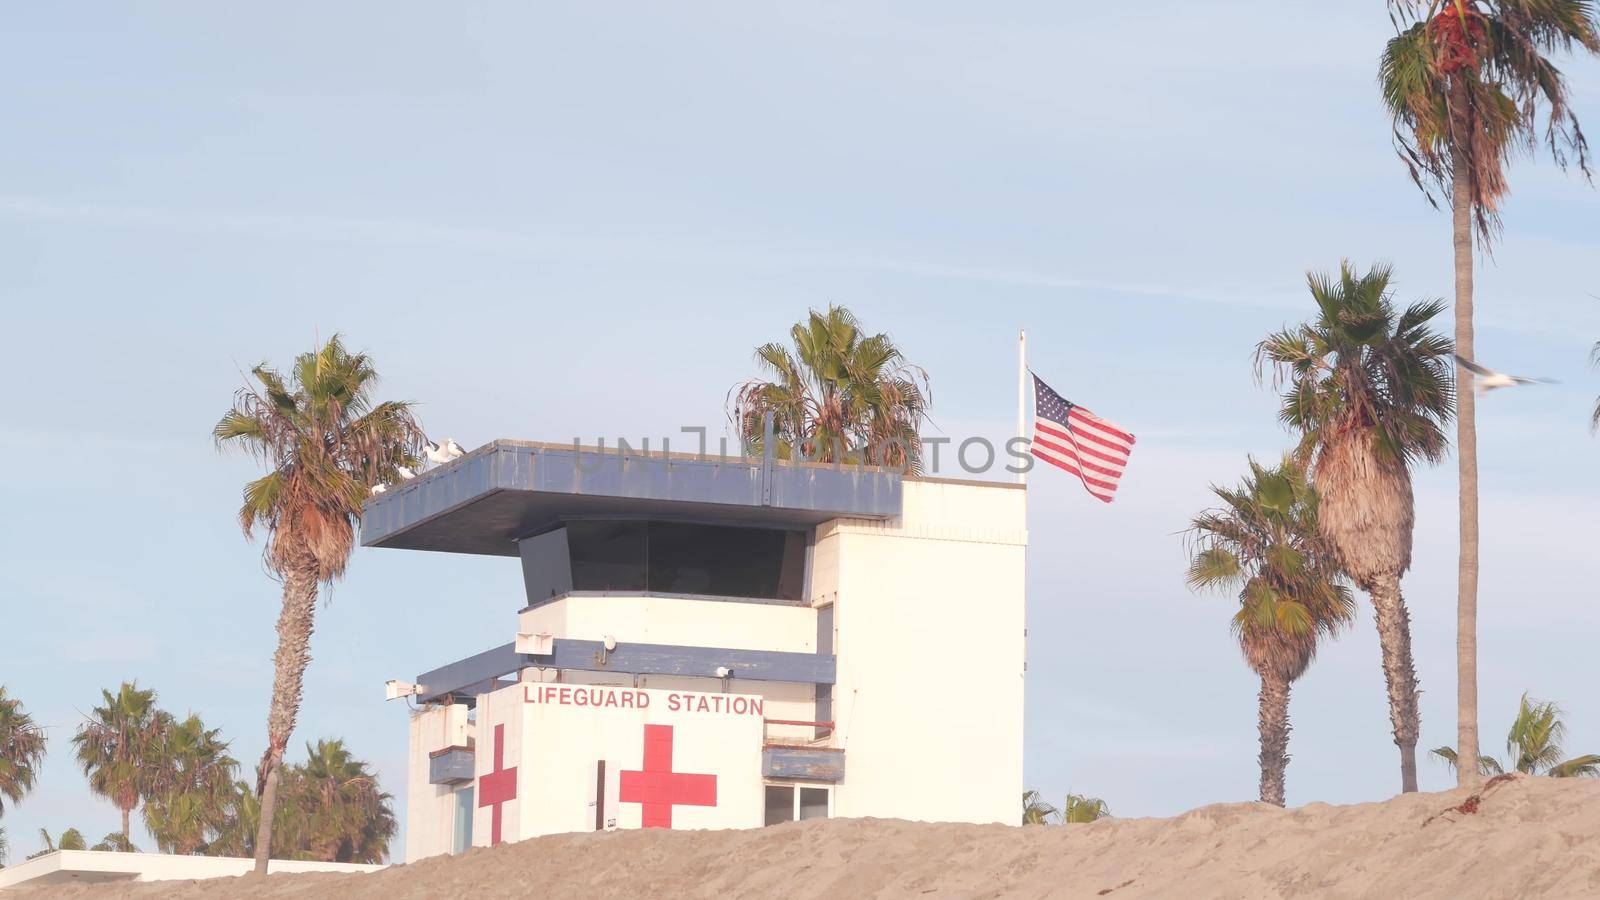 Lifeguard stand, life guard tower hut, surfing safety on California beach, USA. Summer pacific ocean aesthetic. Rescue station, coast lifesavers wachtower or house, palm trees, Ocean Beach, San Diego.